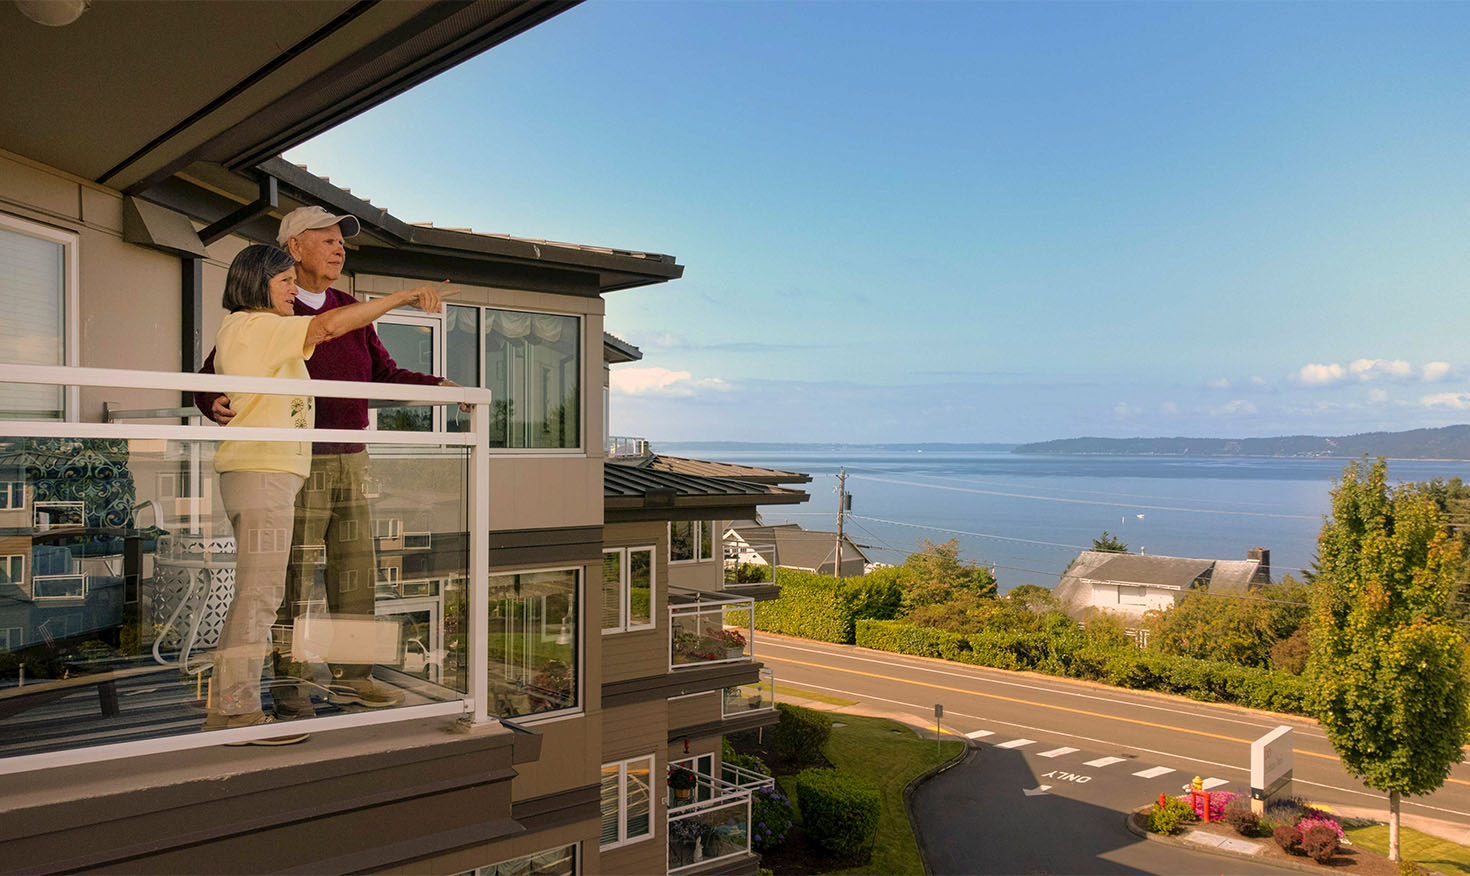 seniors standing on an apartment balcony overlooking the water